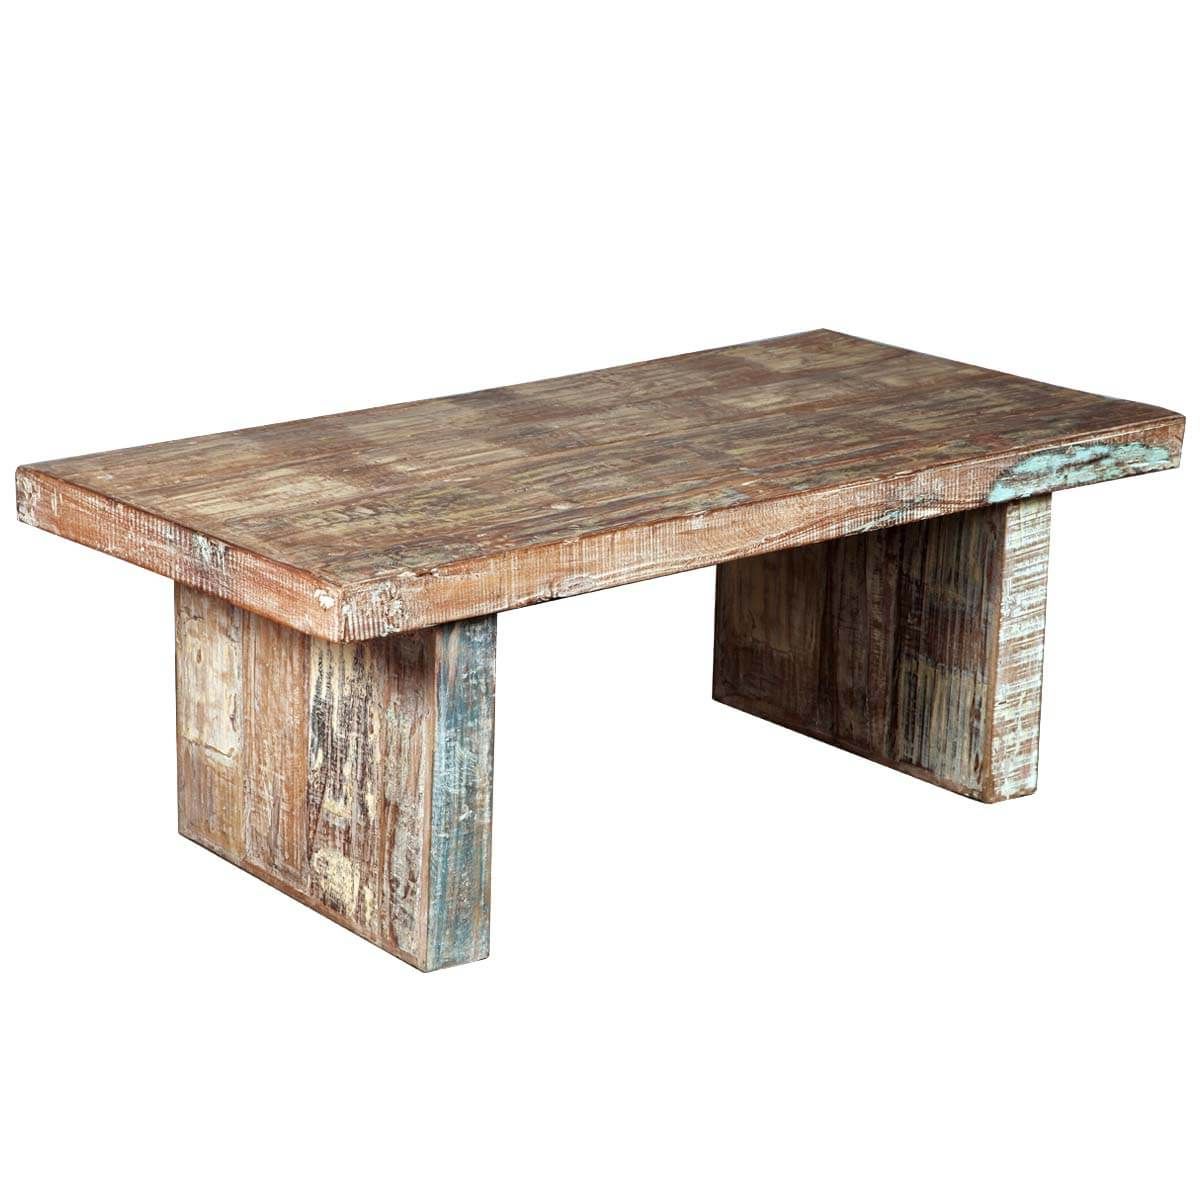 Rustic Mission Reclaimed Wood Distressed Coffee Table With Regard To Most Recent Square Weathered White Wood Coffee Tables (View 8 of 20)